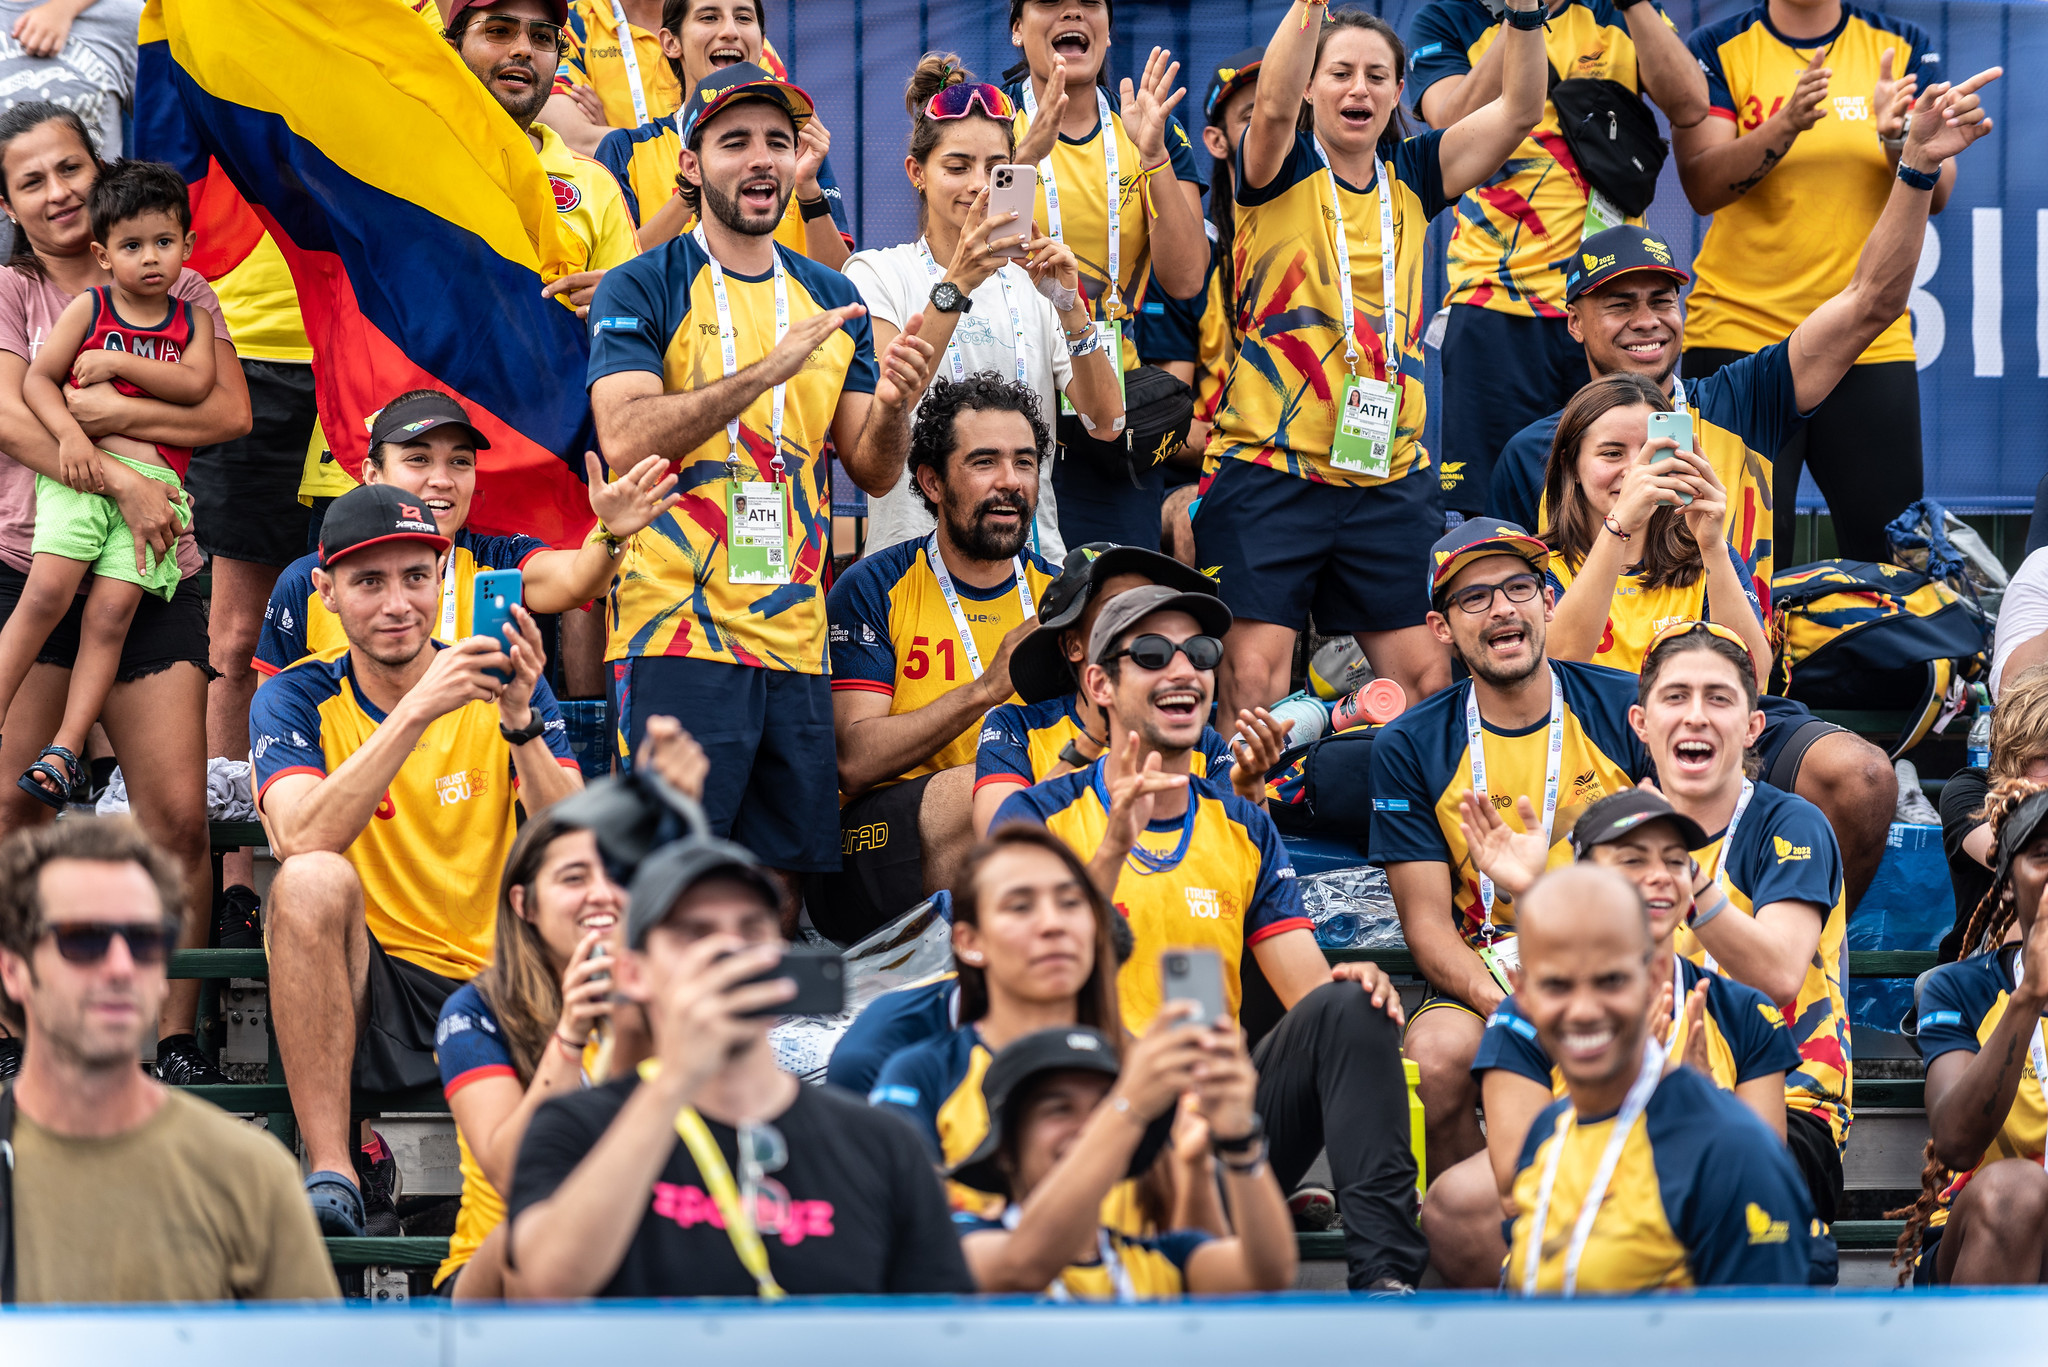 Colombia celebrate excellent first day of competition at The World Games 2022